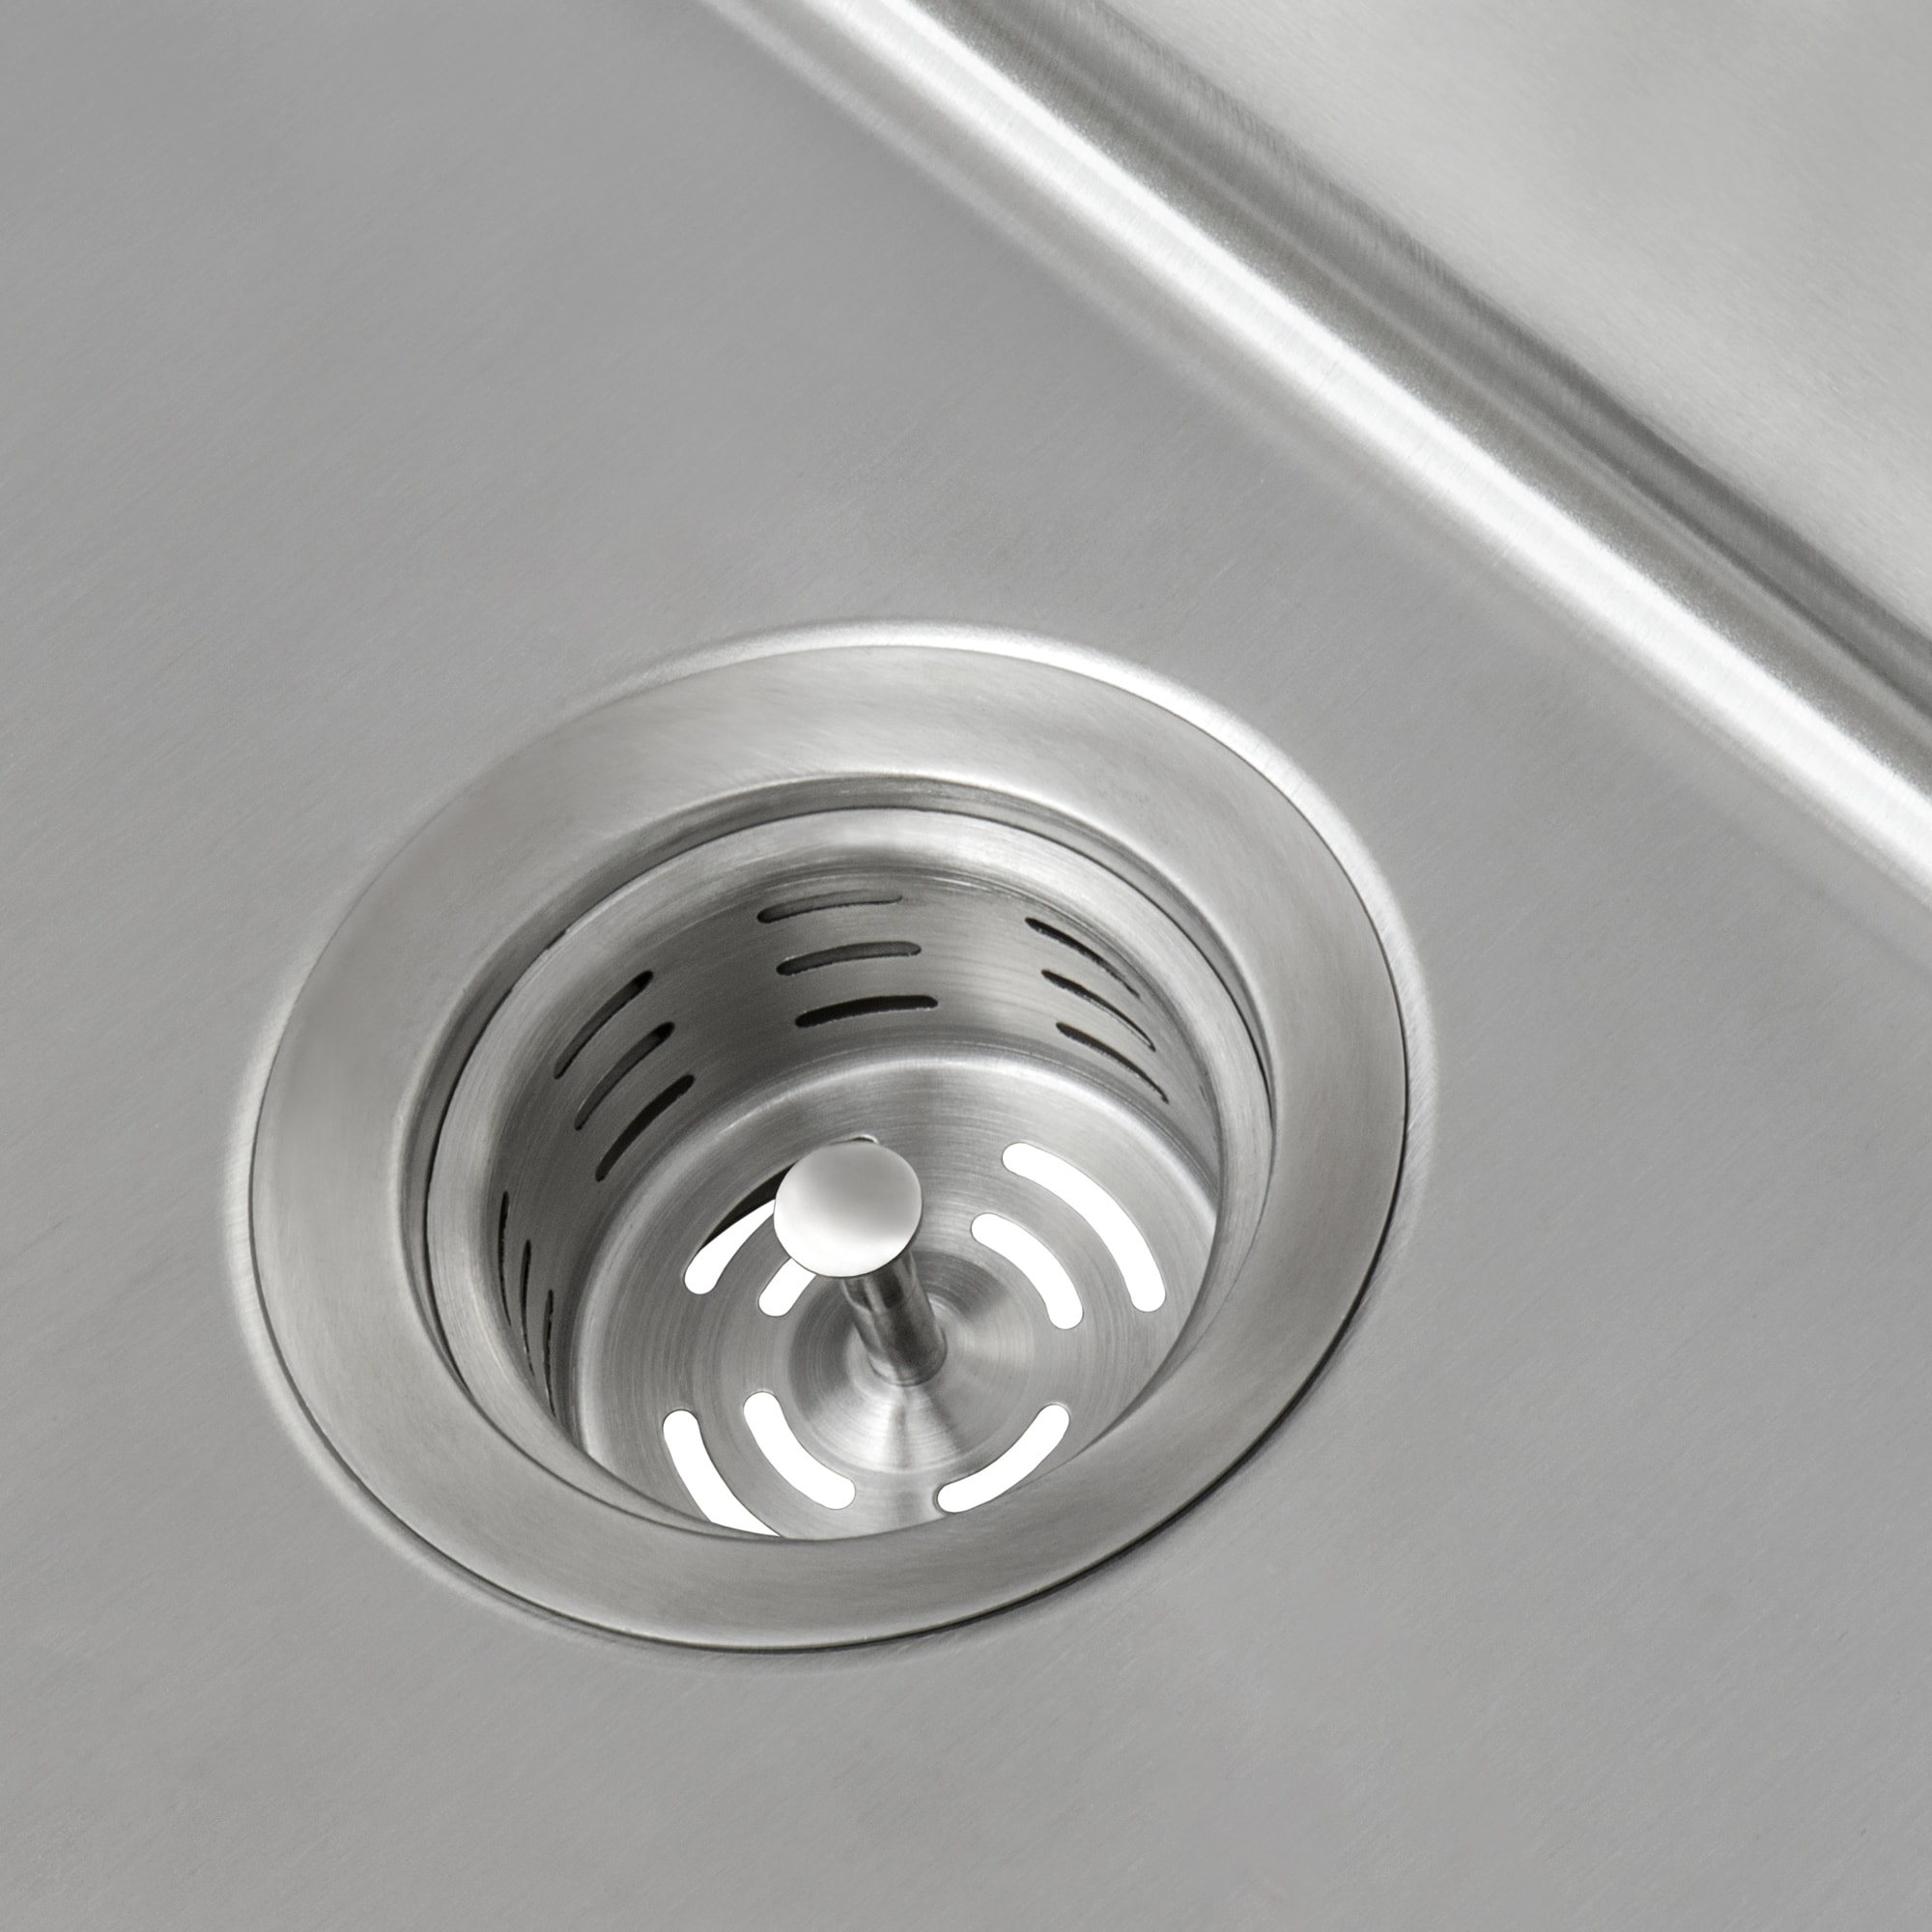 RQYEKDO RQYEKDO-PDBR86 Kitchen Sink Stopper, Stainless Steel 3-1/2 inch  Universal Sink Plug Cover for Garbage Disposal Flange Drain,Fit for  InSinkErat